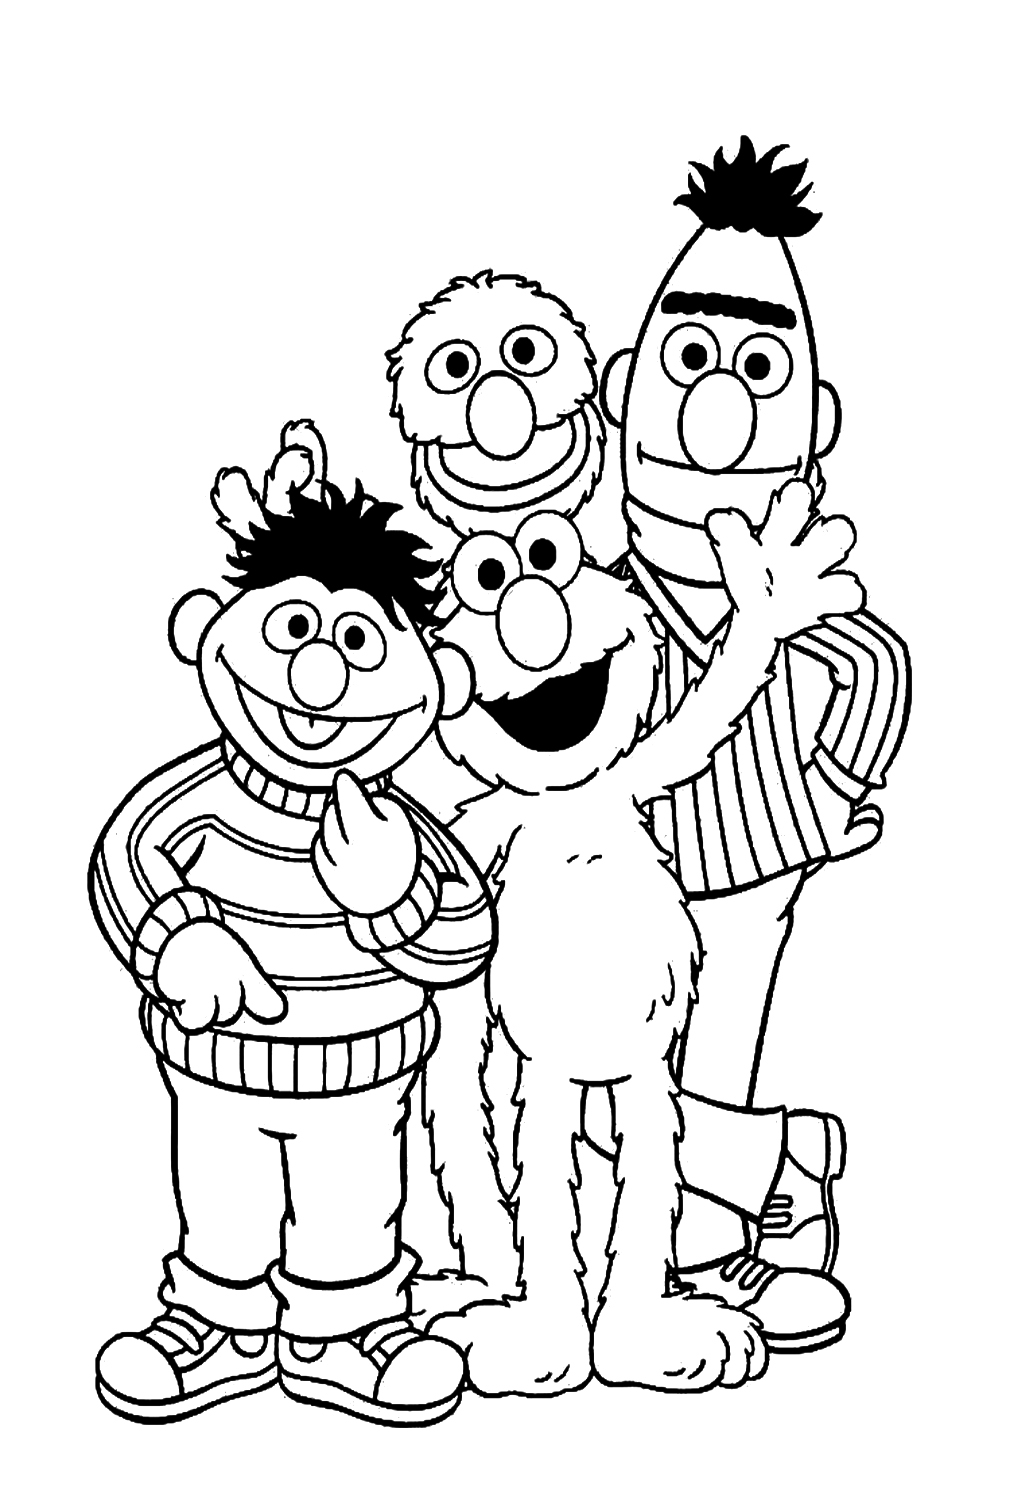 Elmo, Grover, Bert and Ernie Coloring Page